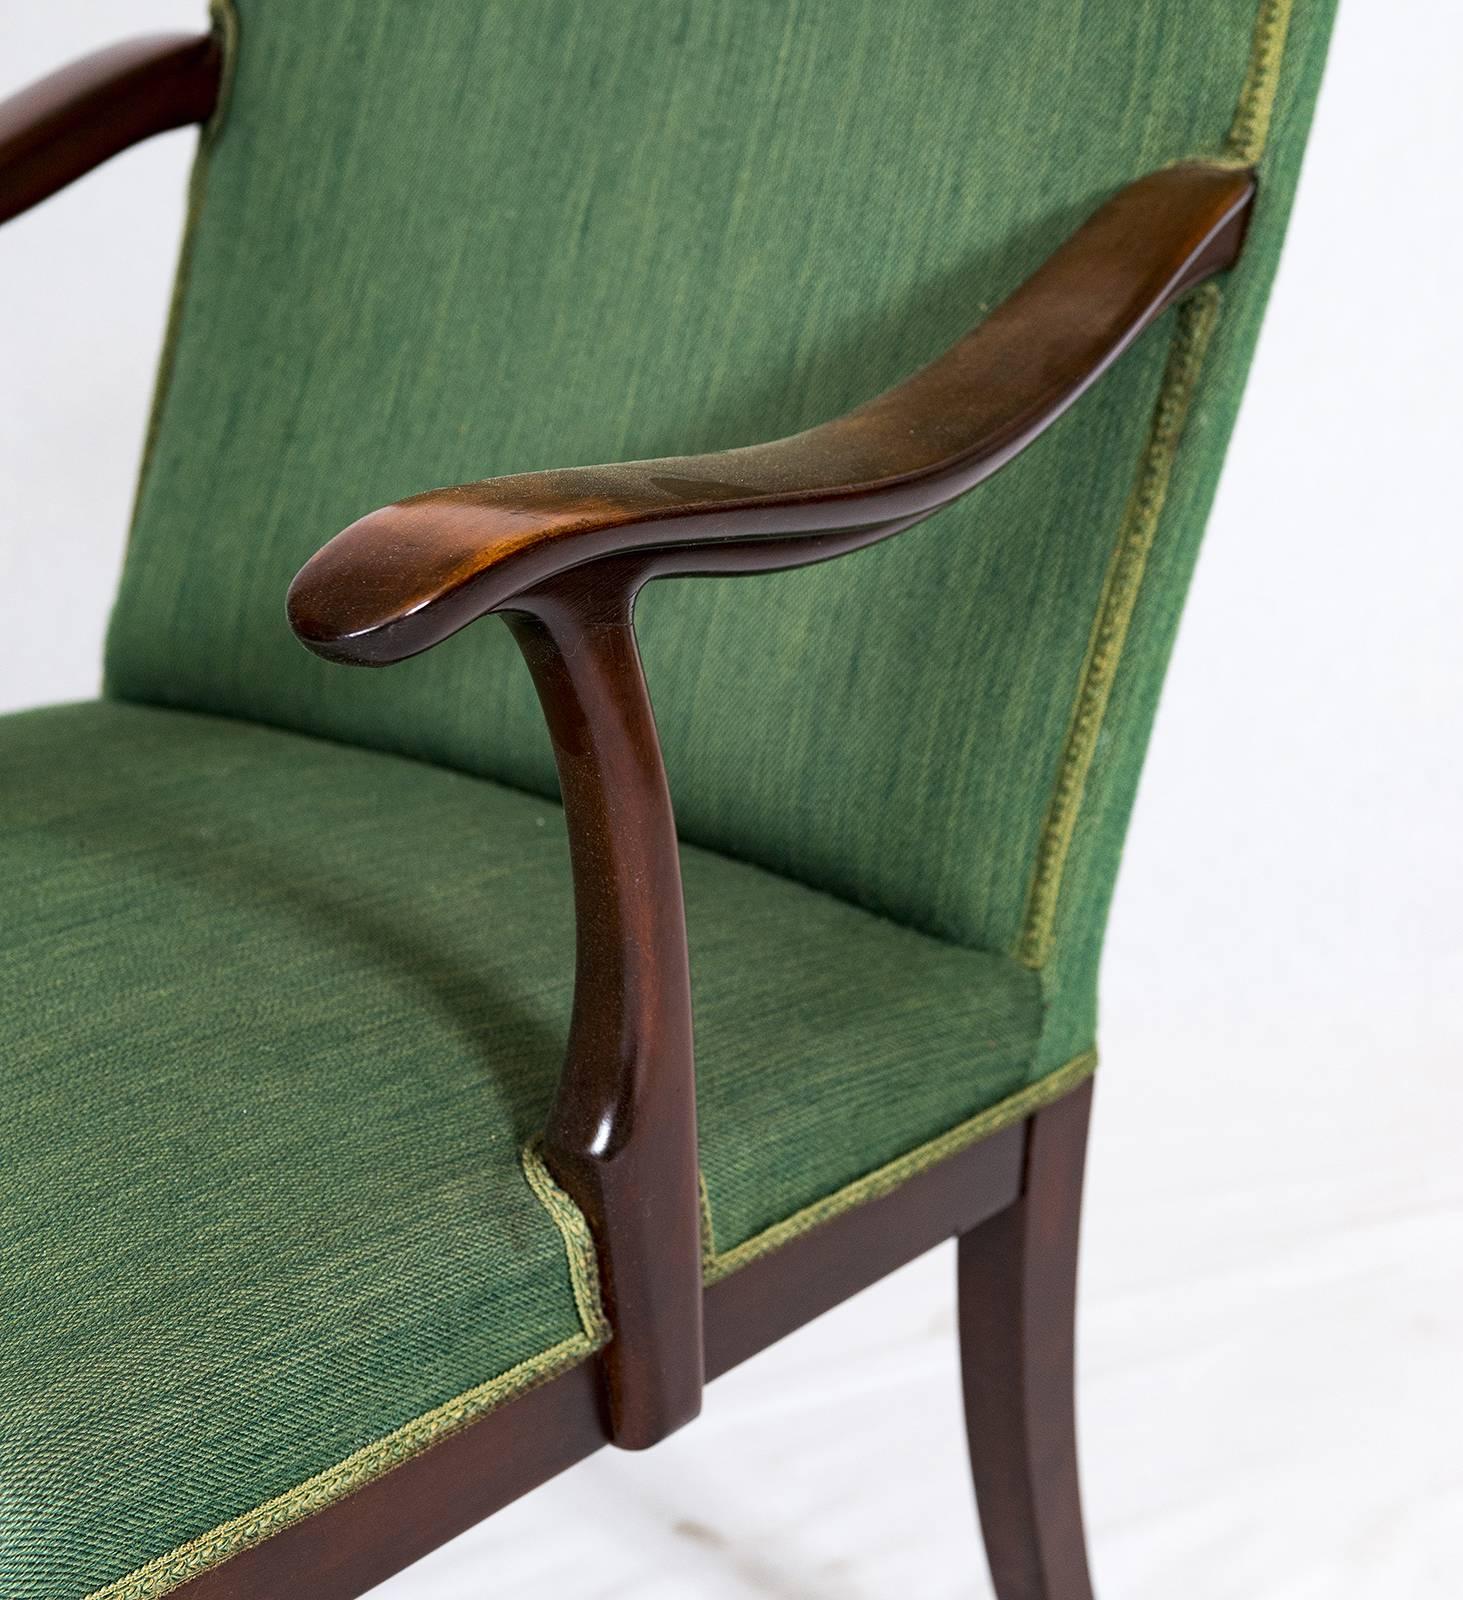 Mid-20th Century Frits Henningsen Lounge Chair For Sale